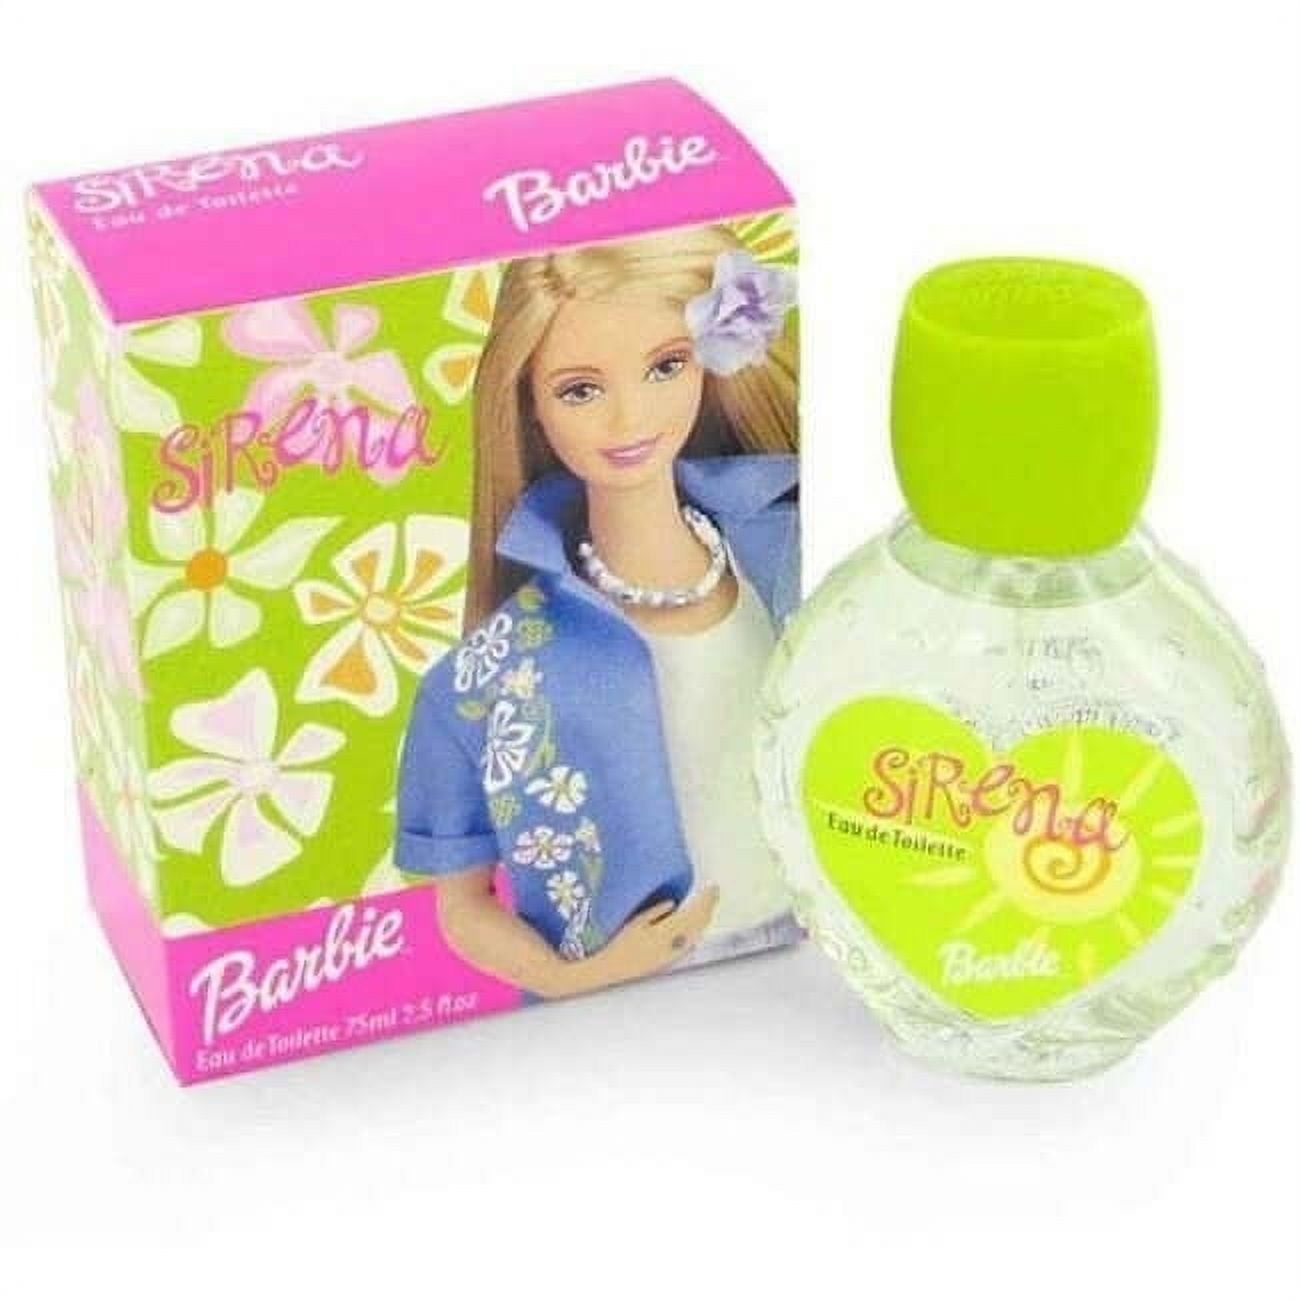 Sirena by Barbie » Reviews & Perfume Facts